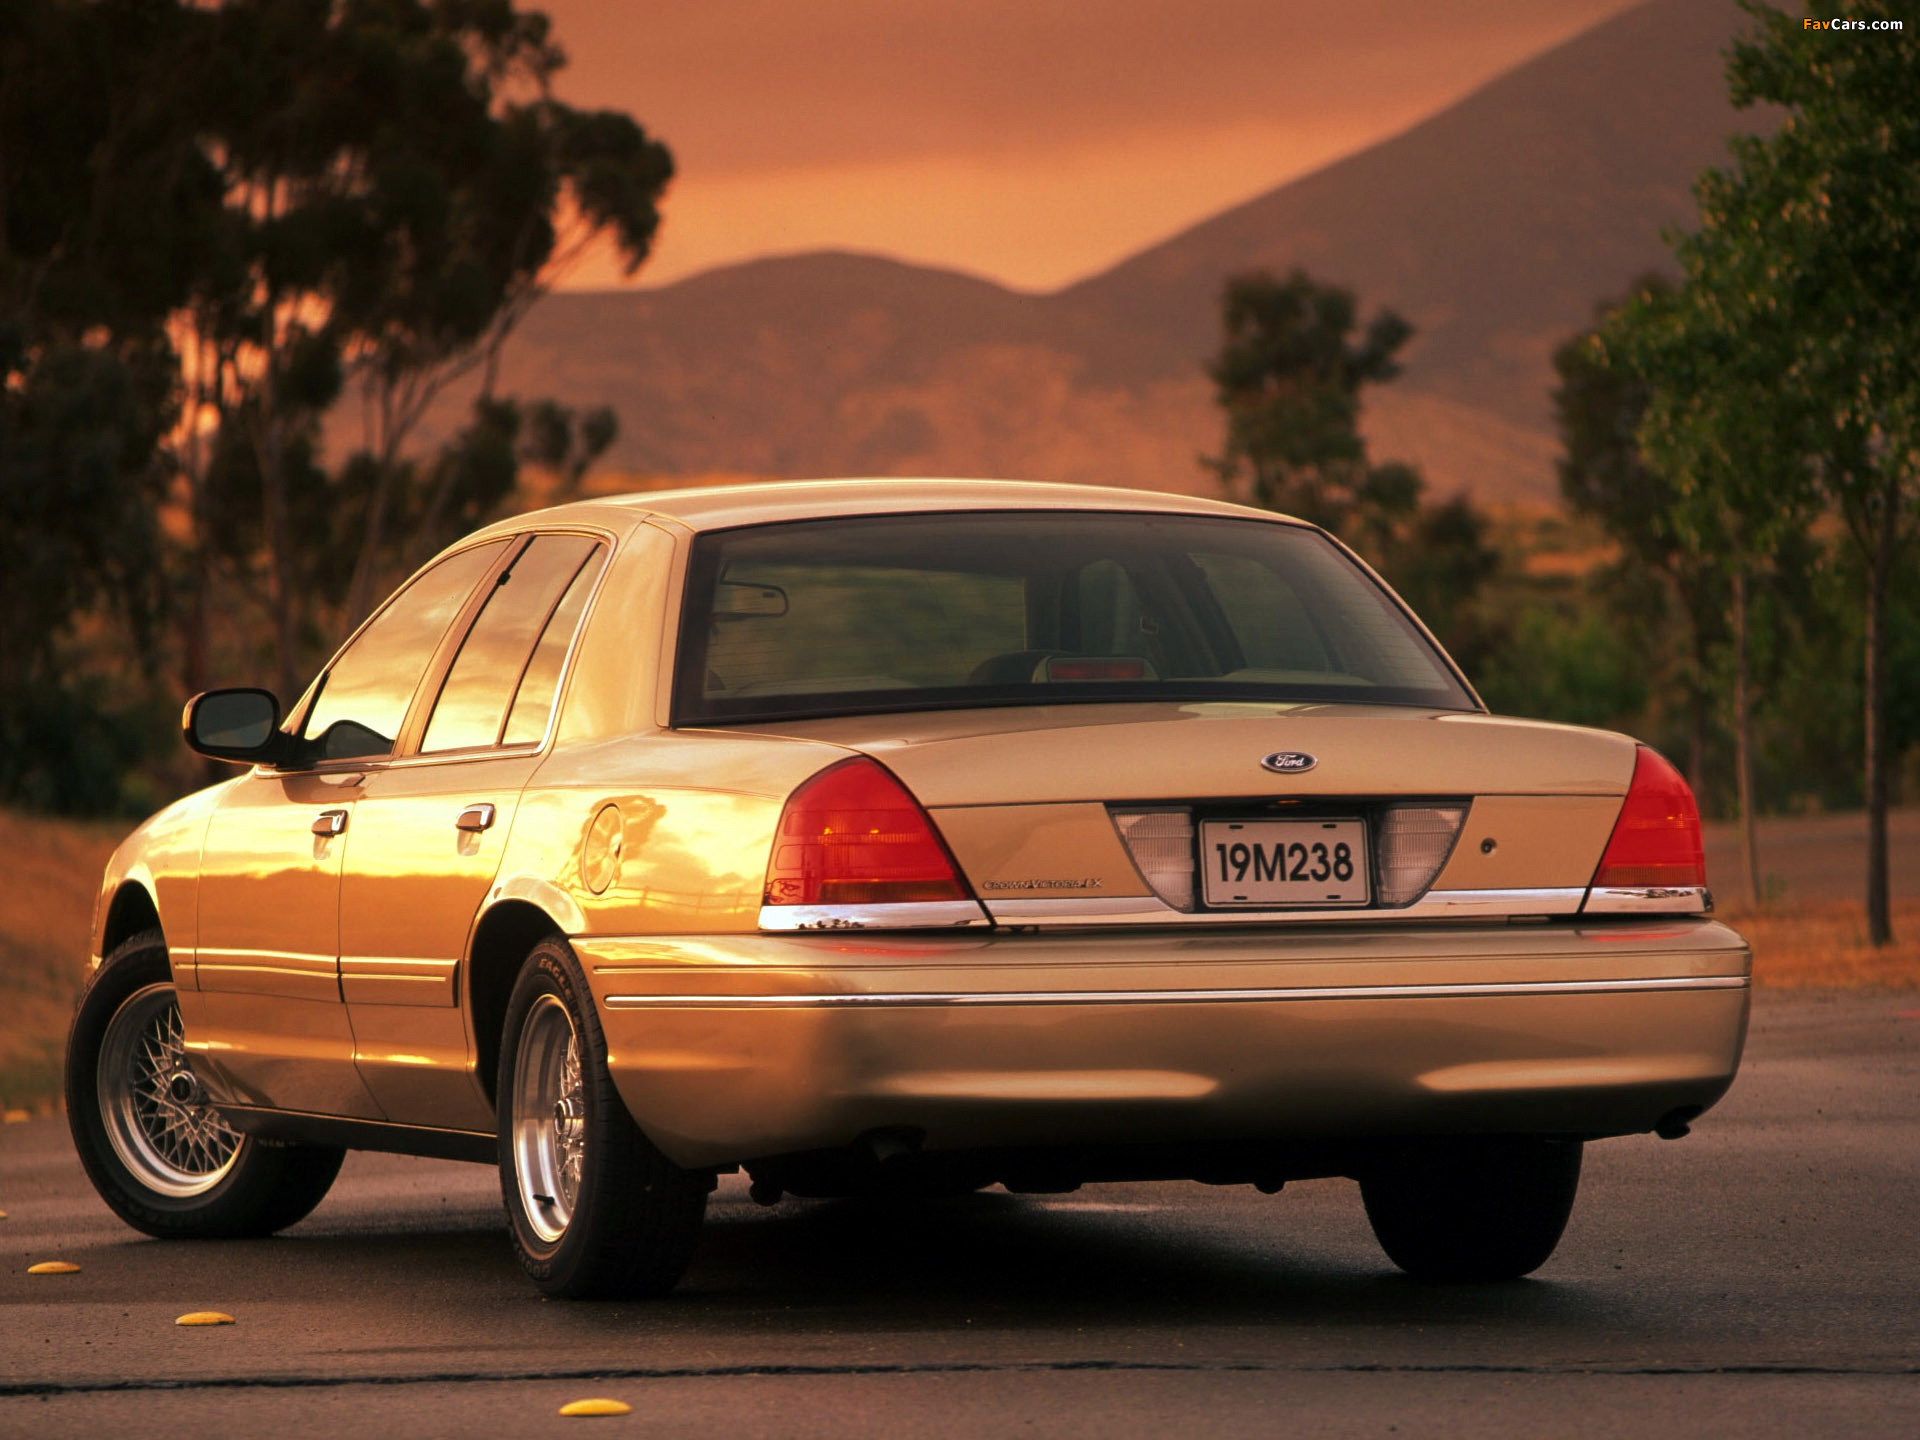 Ford Crown Victoria Wallpapers